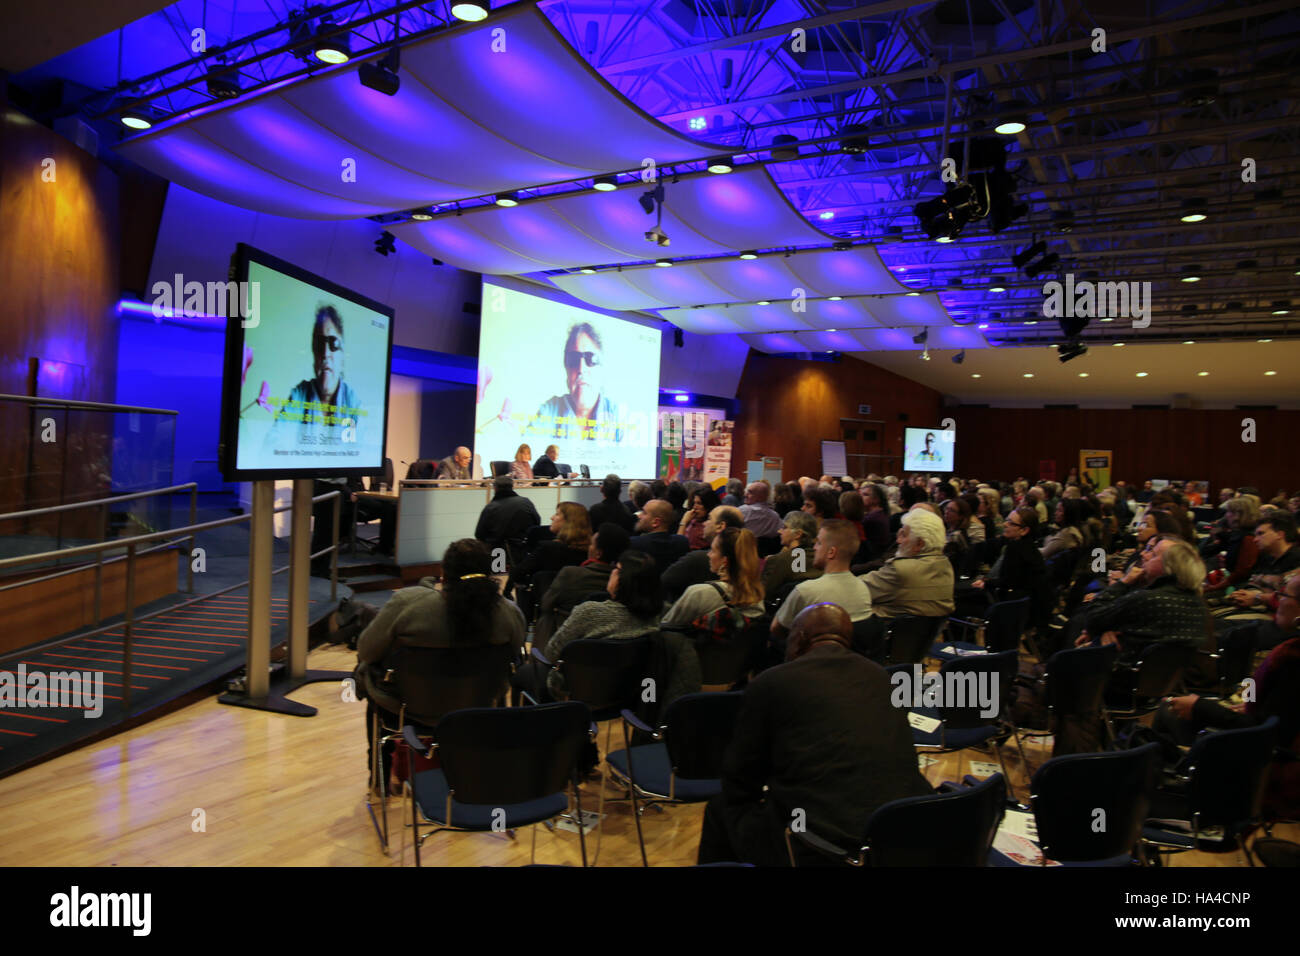 London UK 26 November 2016Ivan Marquez via video link from Colombia addressing the delegates of the Latin America Adelante 2016.Luciano Marín Arango, aka "Iván Márquez"  is a Colombian guerrilla leader, member of the Revolutionary Armed Forces of Colombia (FARC) part of its Secretariat higher command and adviser to the Northwestern and Caribbean blocs. In August 2016 he concluded a peace agreement with the Colombian President Manuel Santos, ending the Colombian civil war @Paul Quezada-Neiman/Alamy Live News Stock Photo